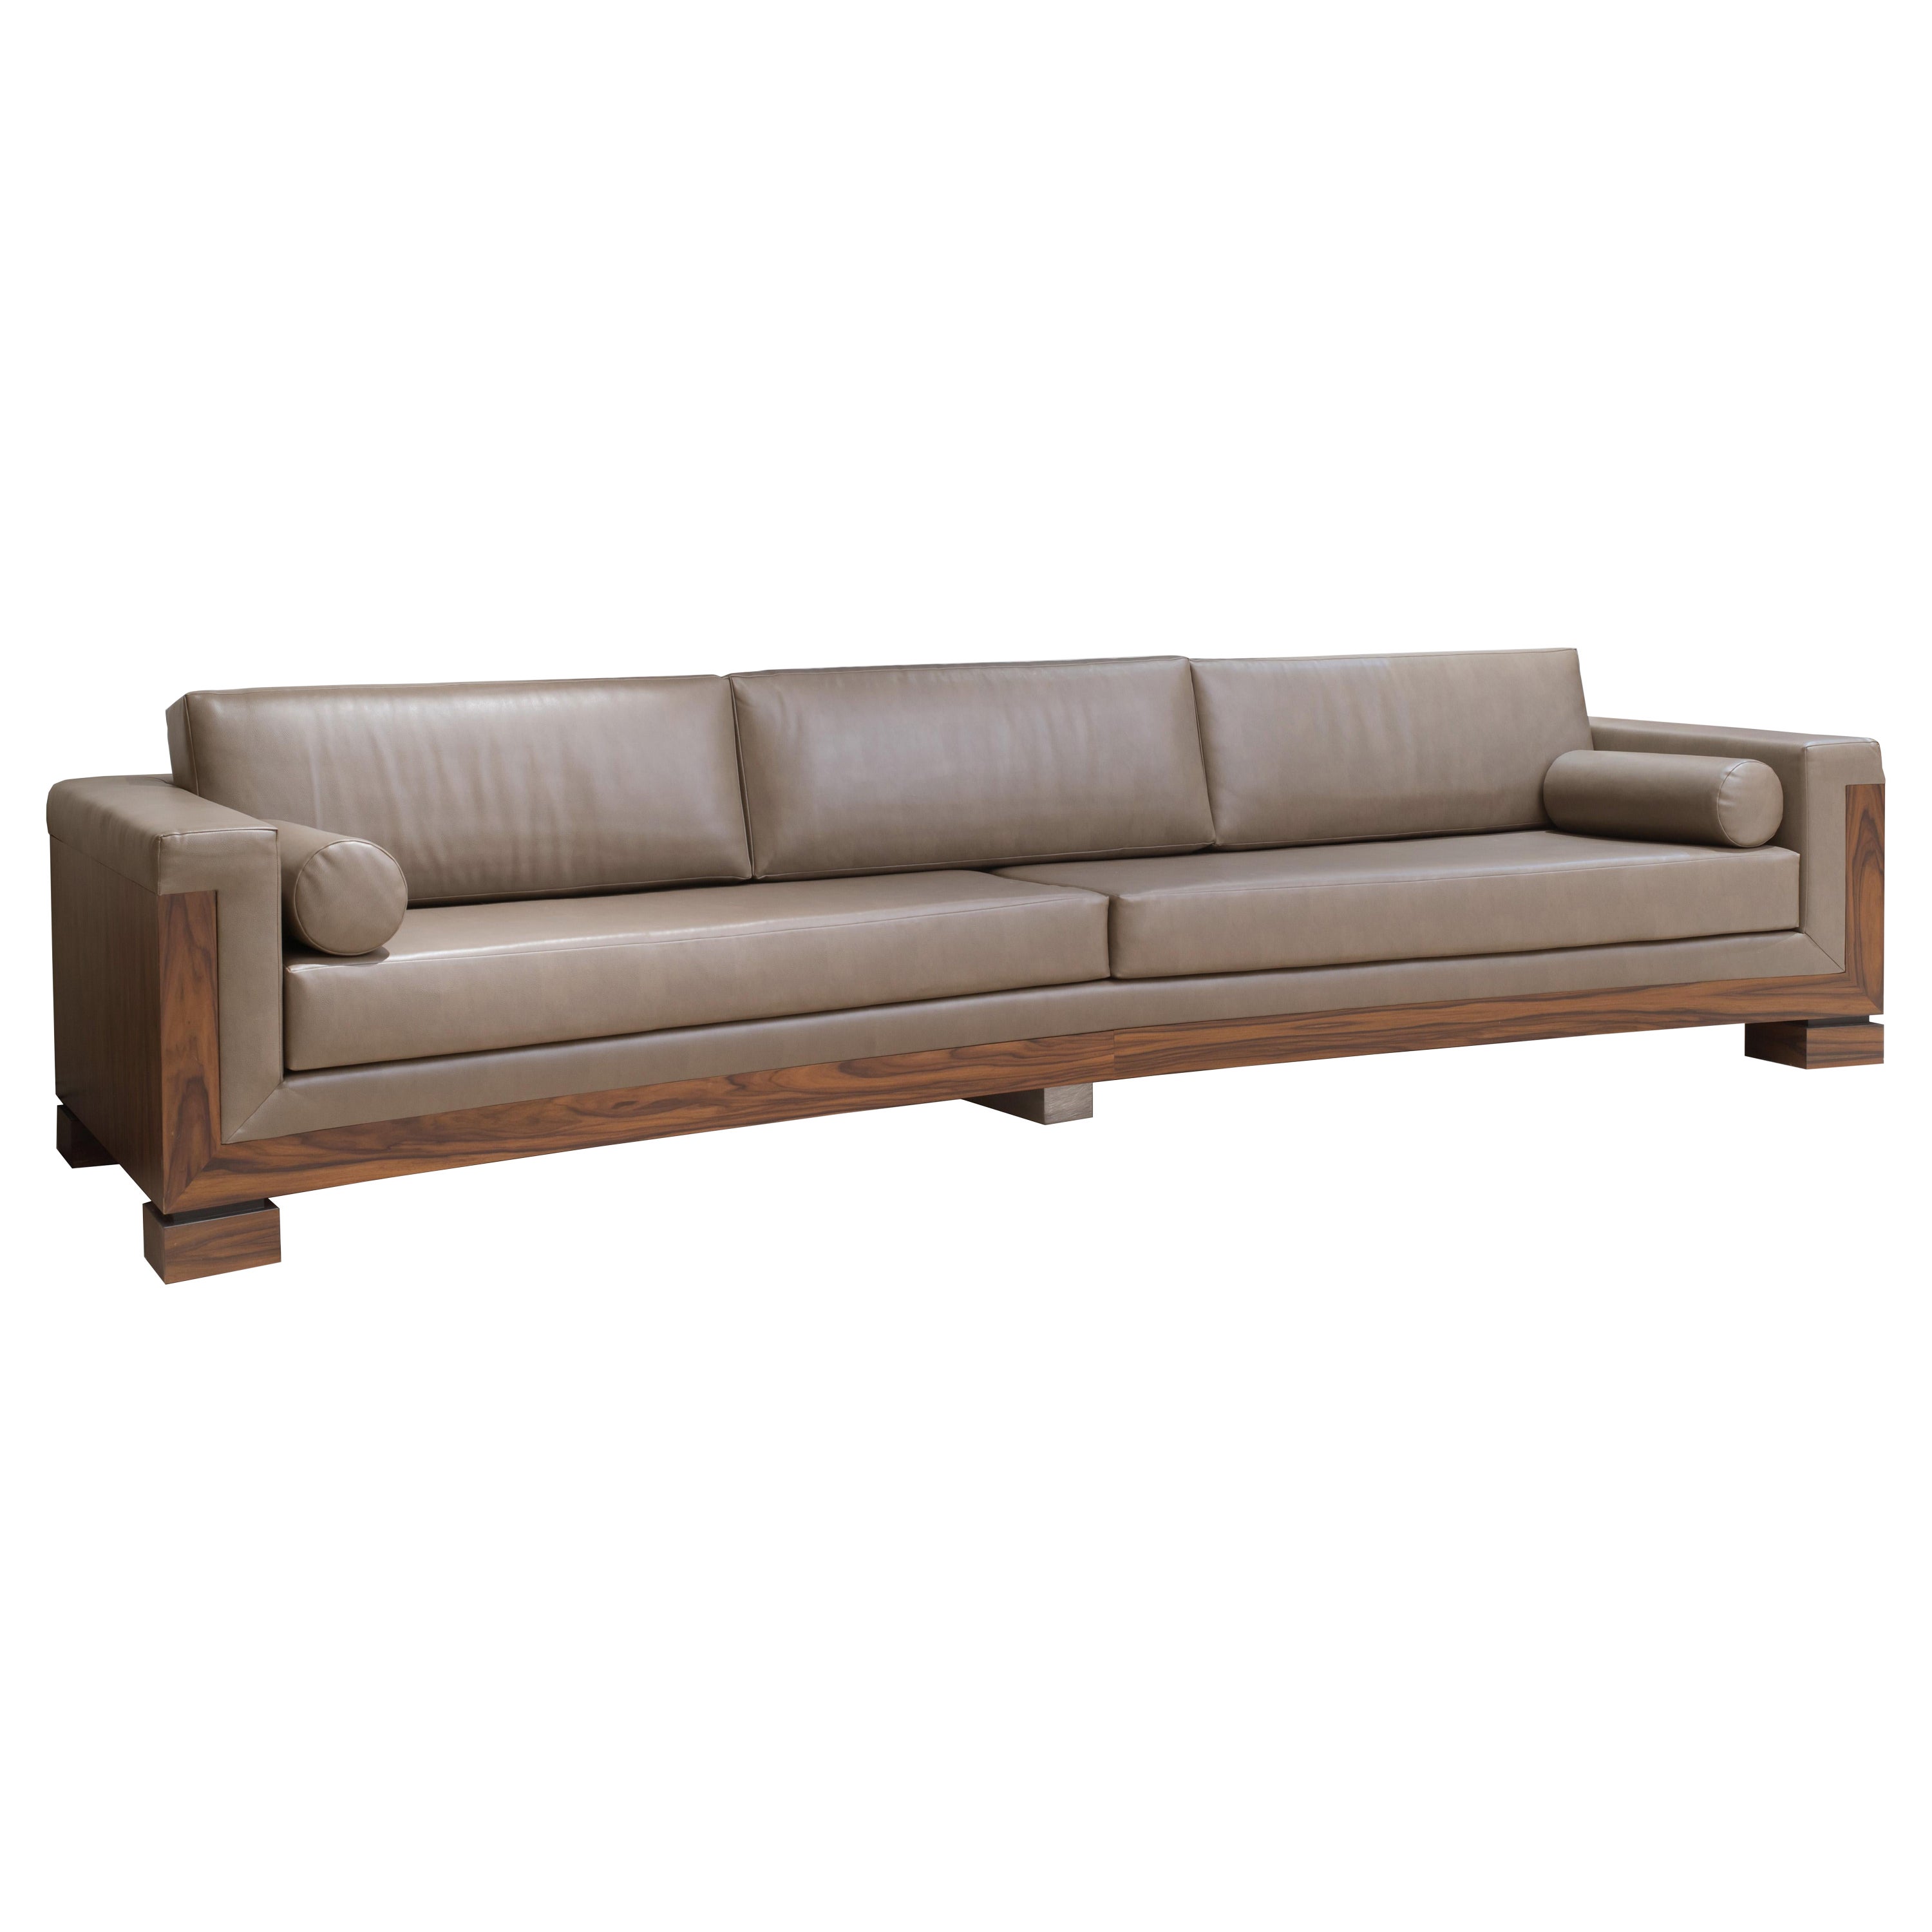 Contemporary Extra Long Taupe Leather Sofa For Sale